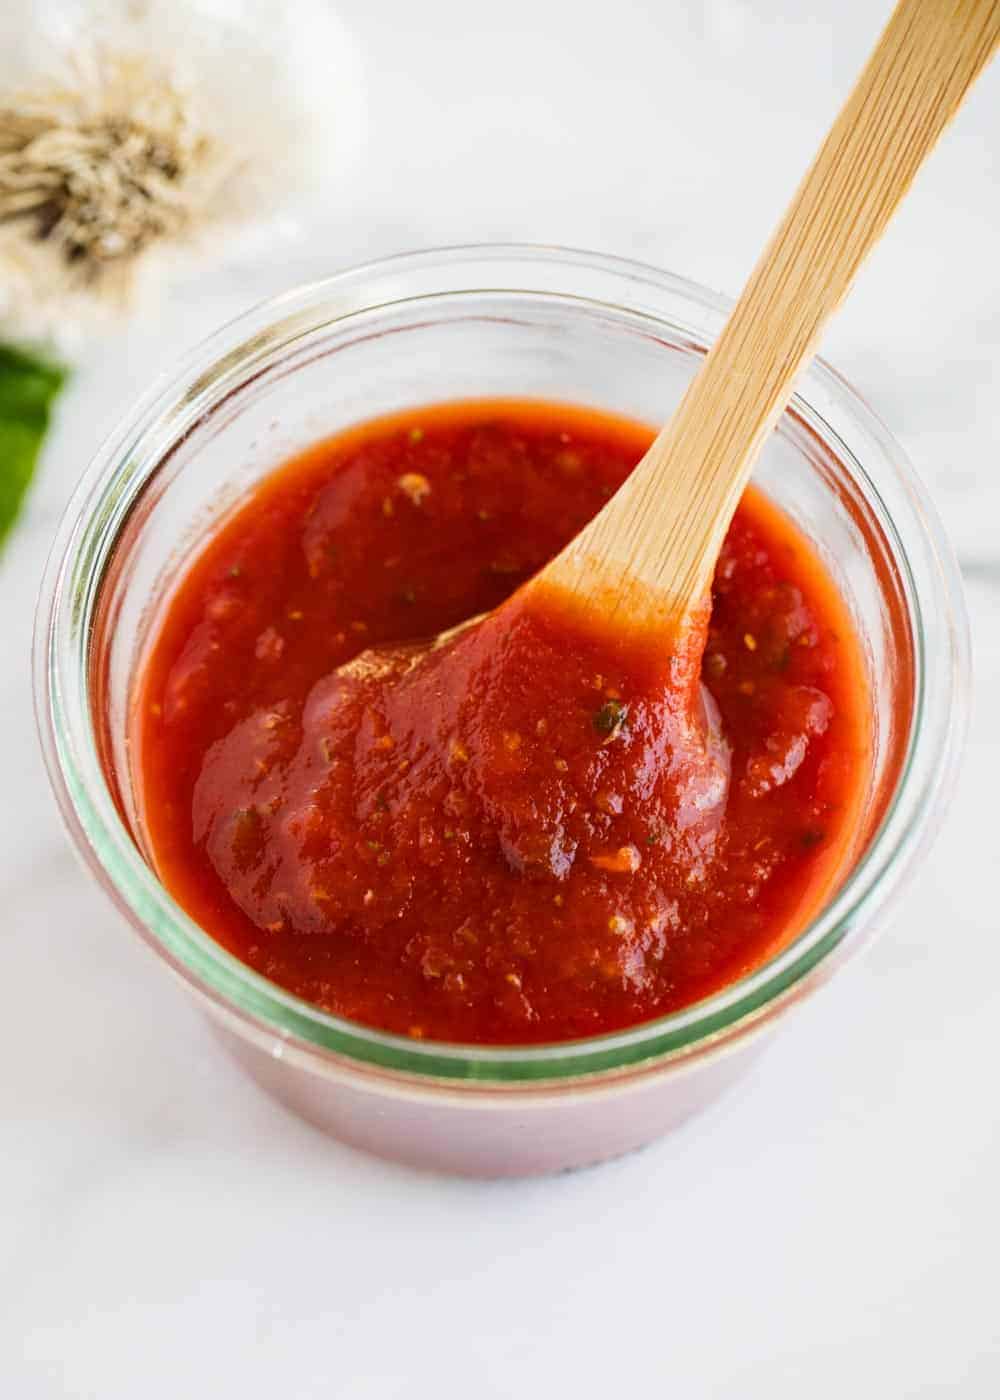 Easy Homemade Pizza Sauce 5 Ingredients I Heart Naptime